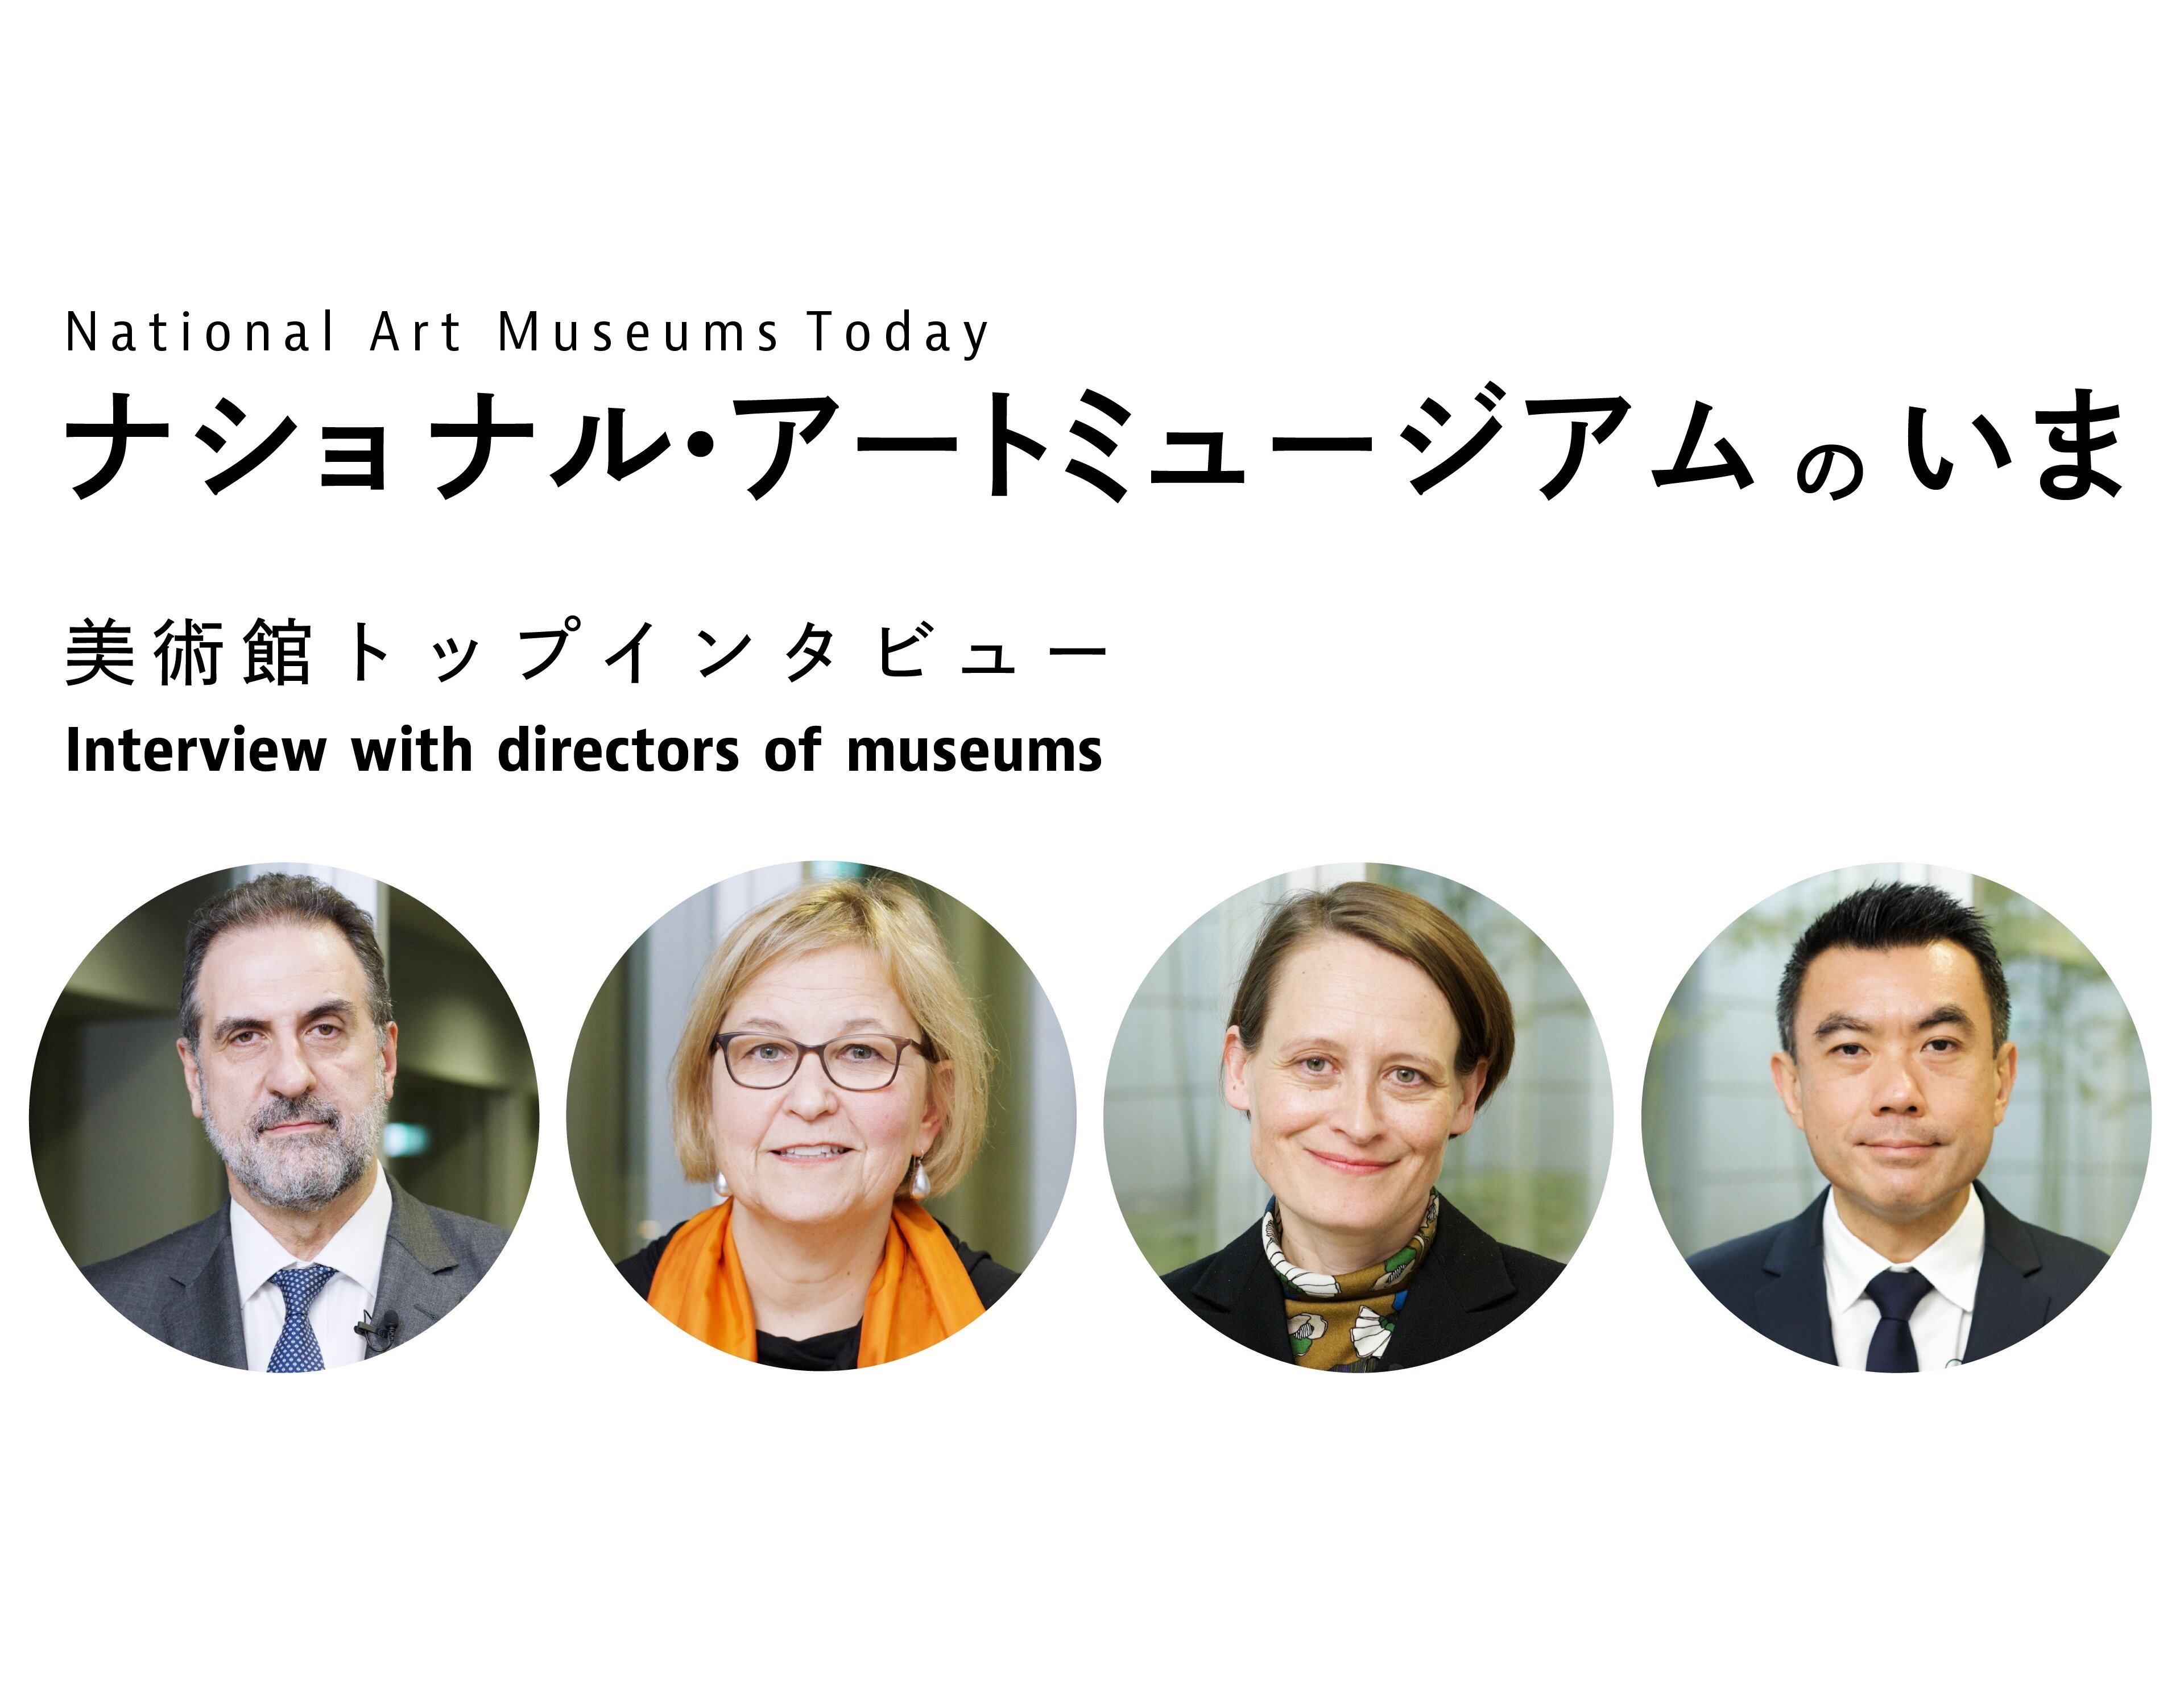 [Video] Interview with directors of museums [National Art Museums Today]

